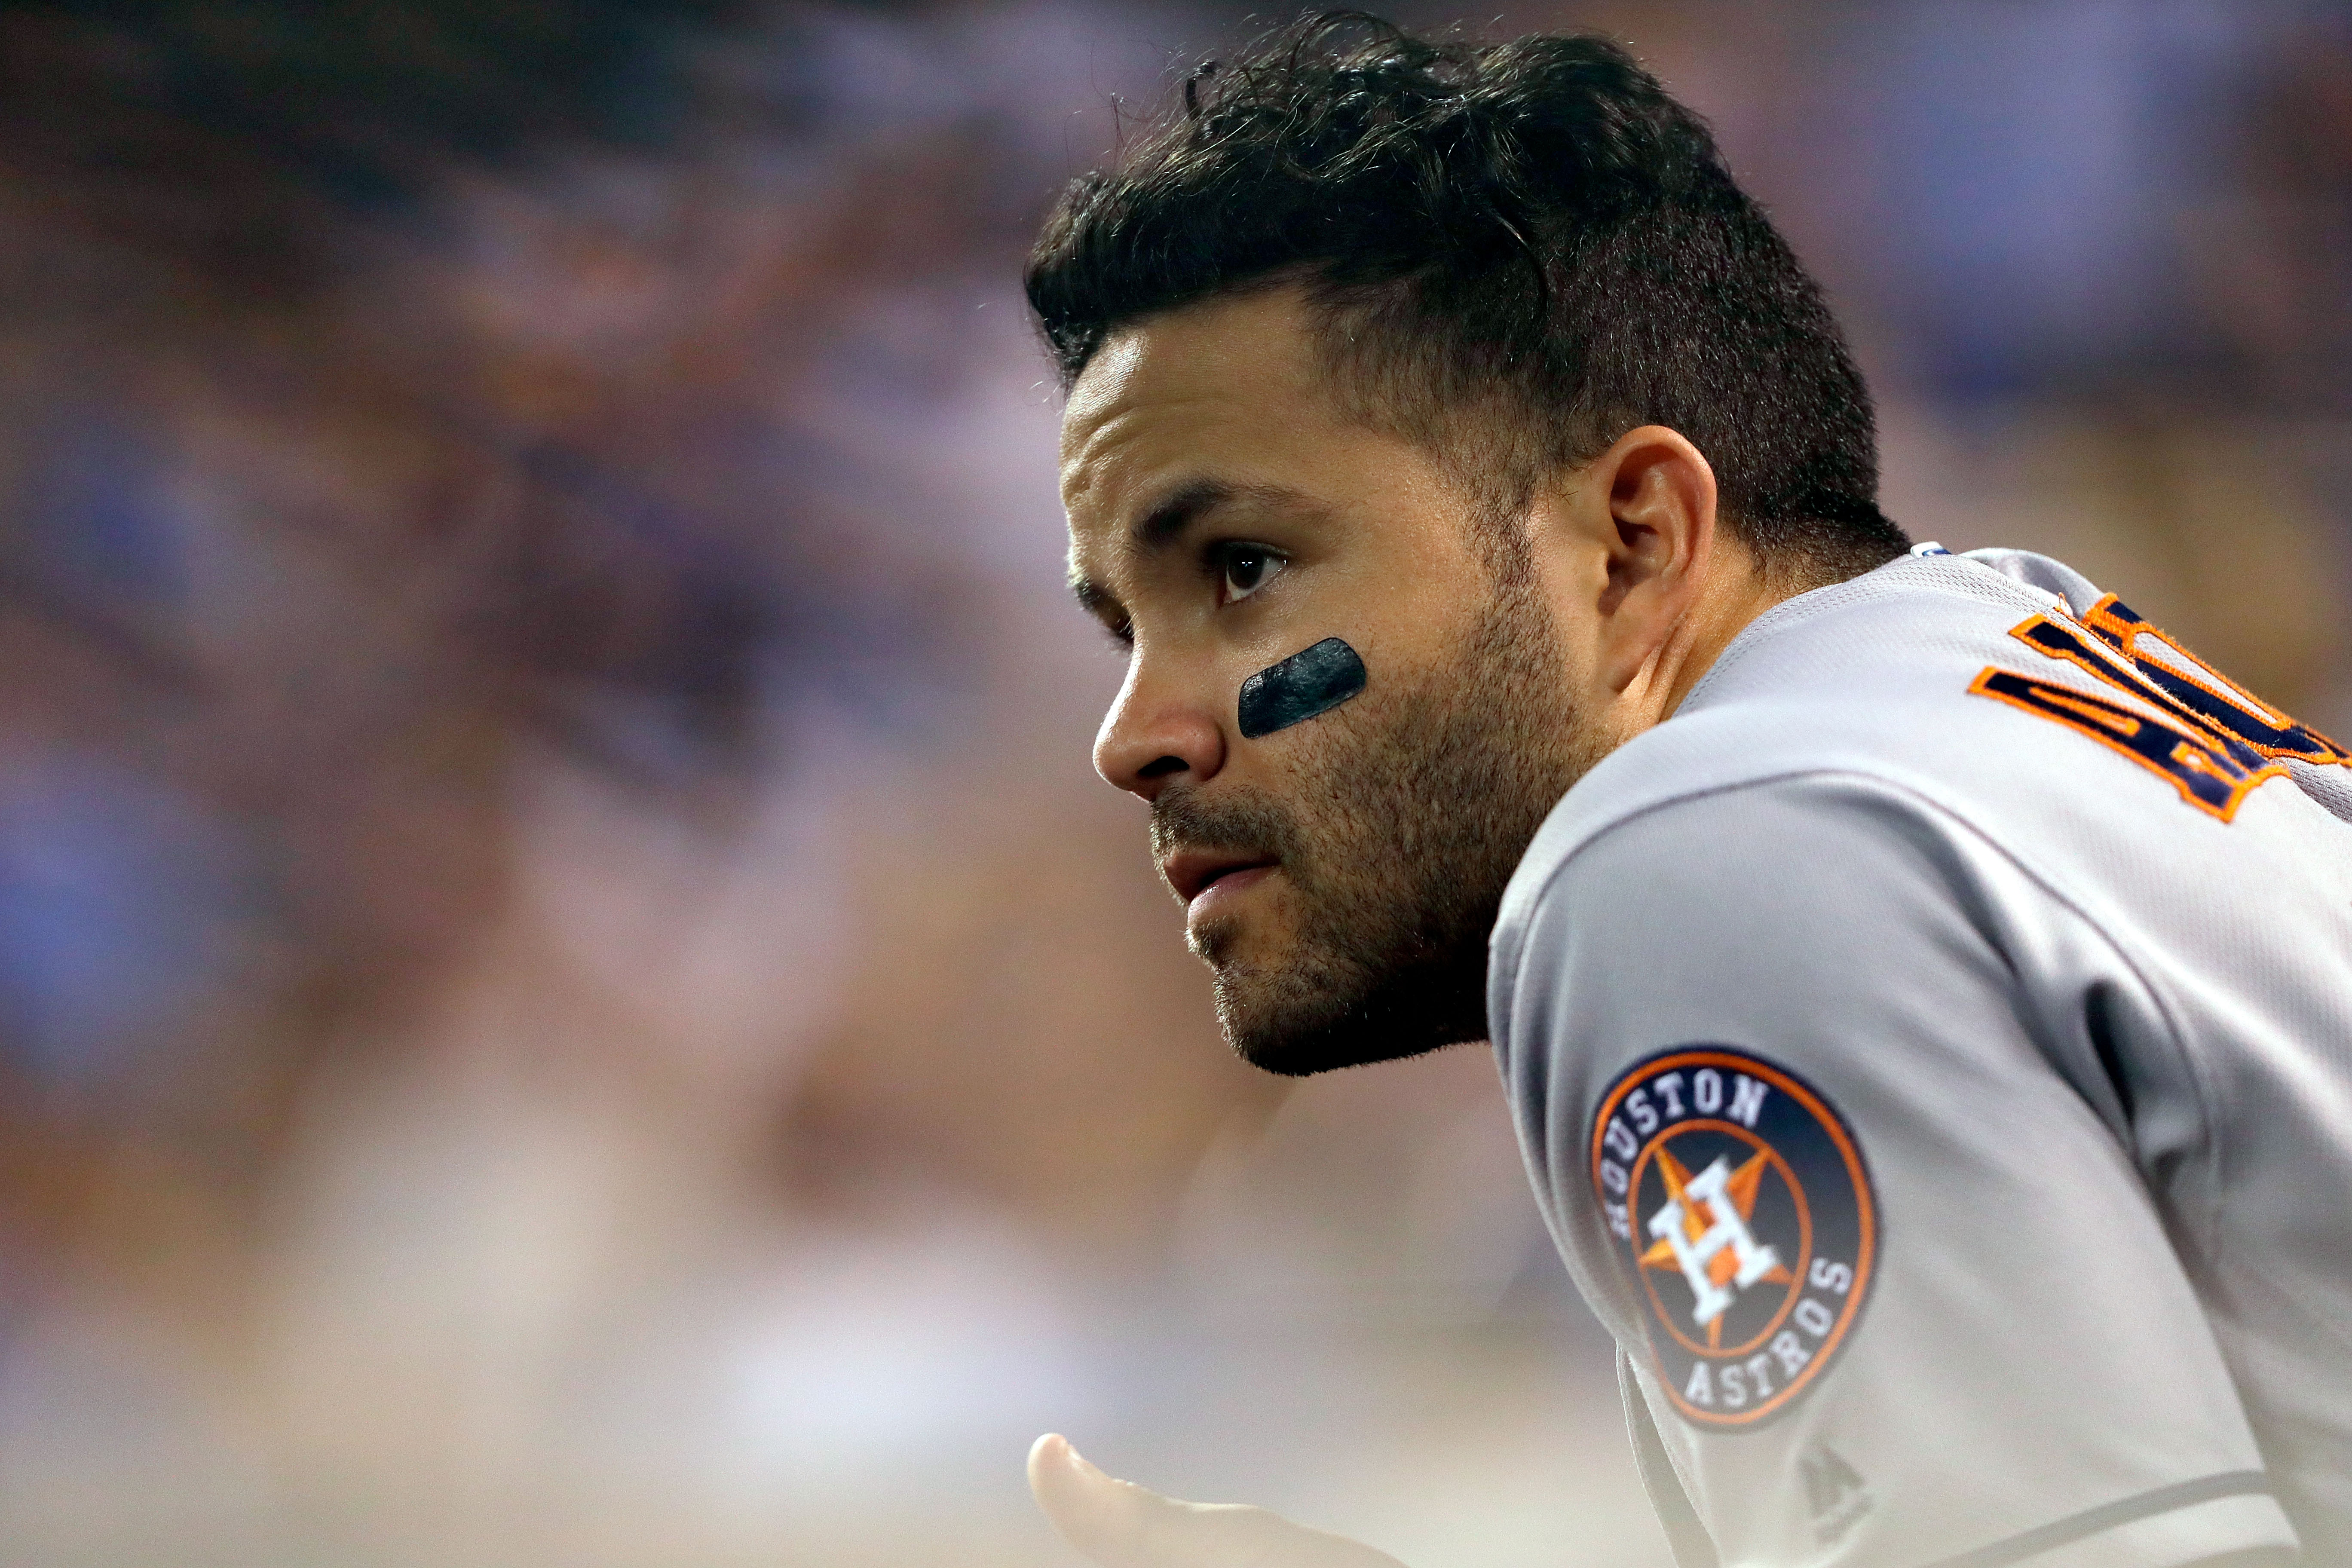 Jose Altuve: 5 Fast Facts You Need to Know